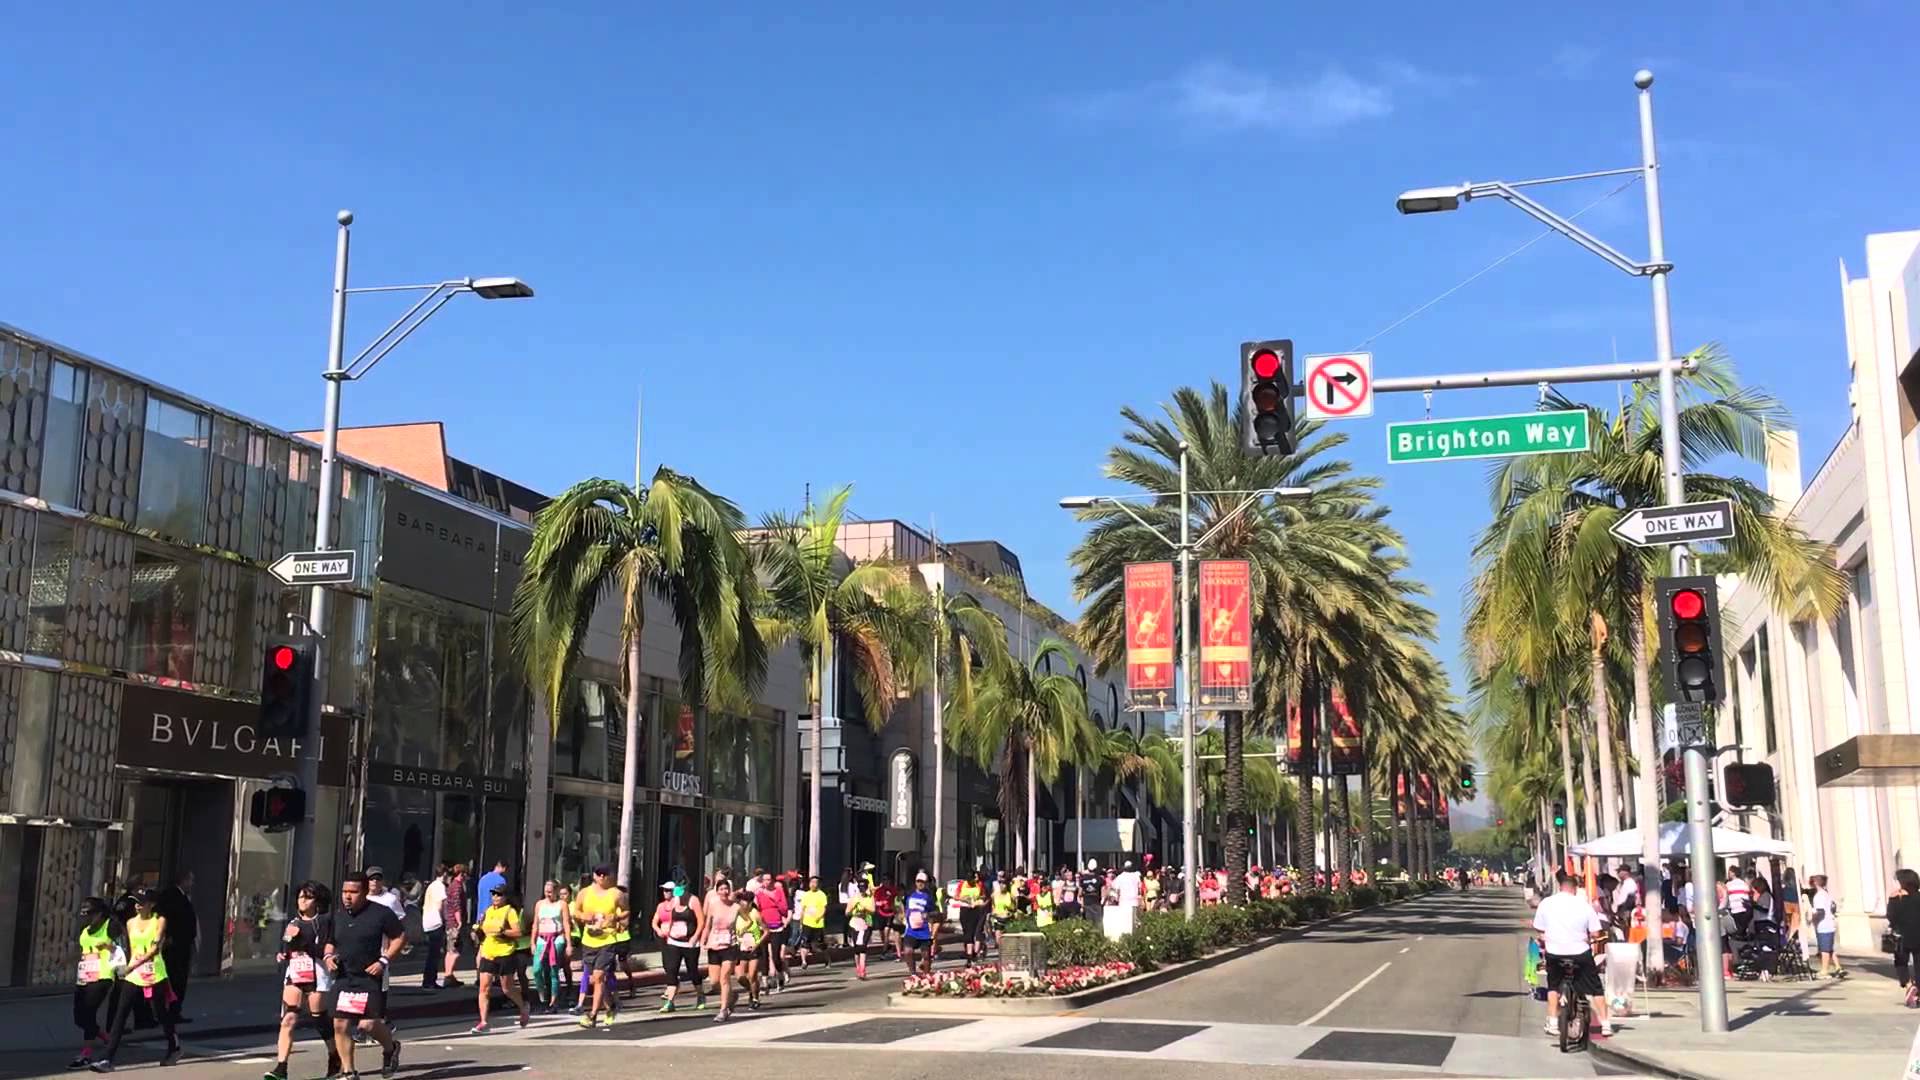 The LA Marathon on Rodeo Drive in Beverly Hills. Beverly Hills Real